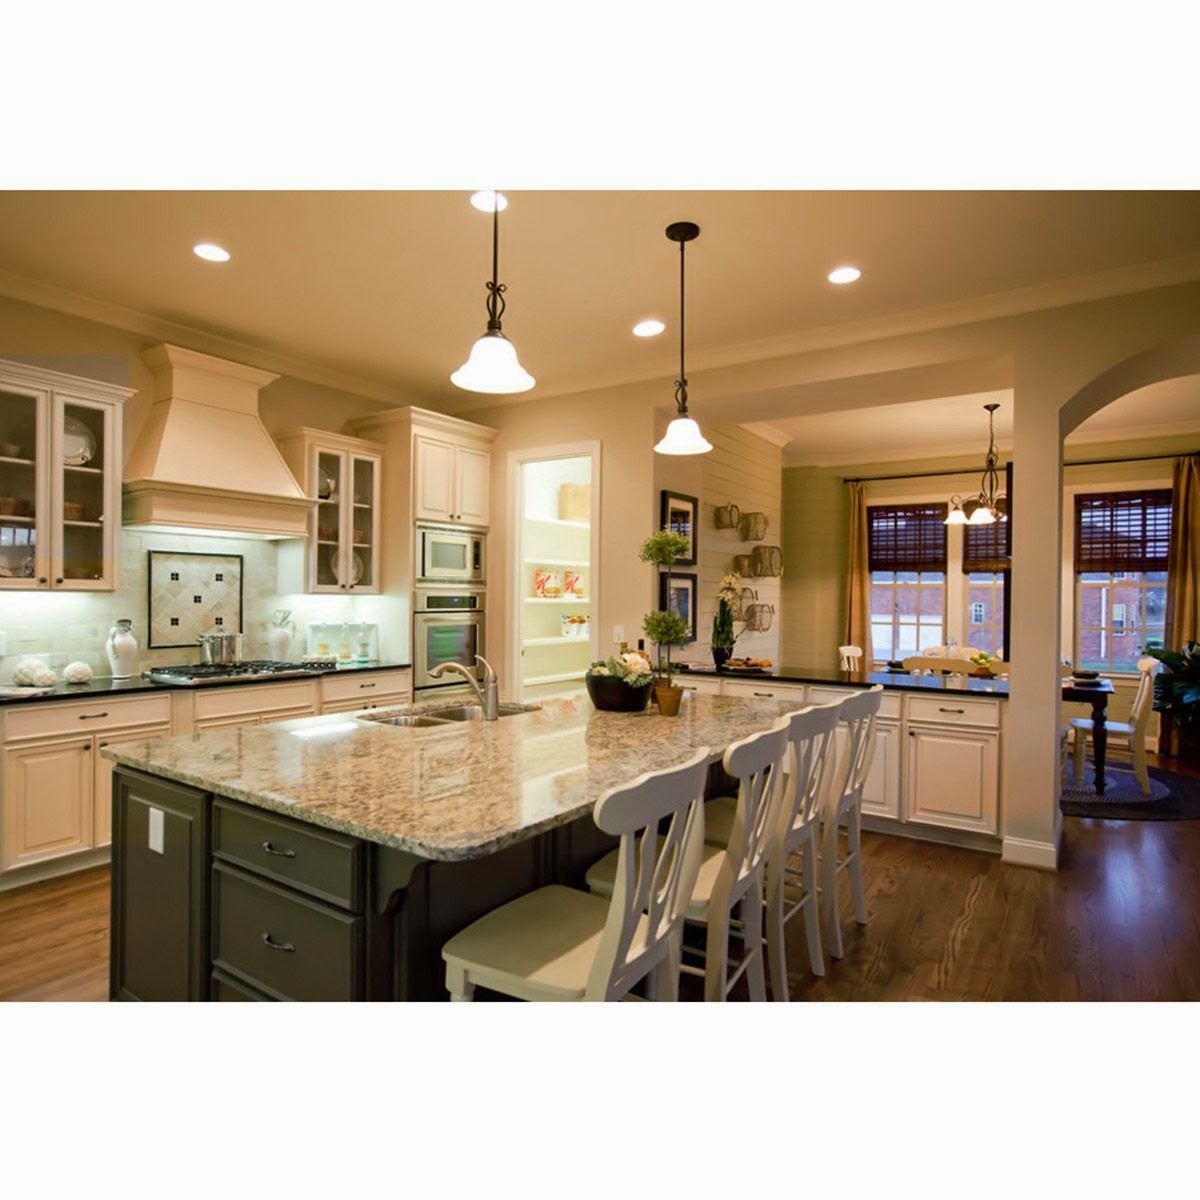 Recessed Lighting Kitchens
 Electric Work Recessed Lights